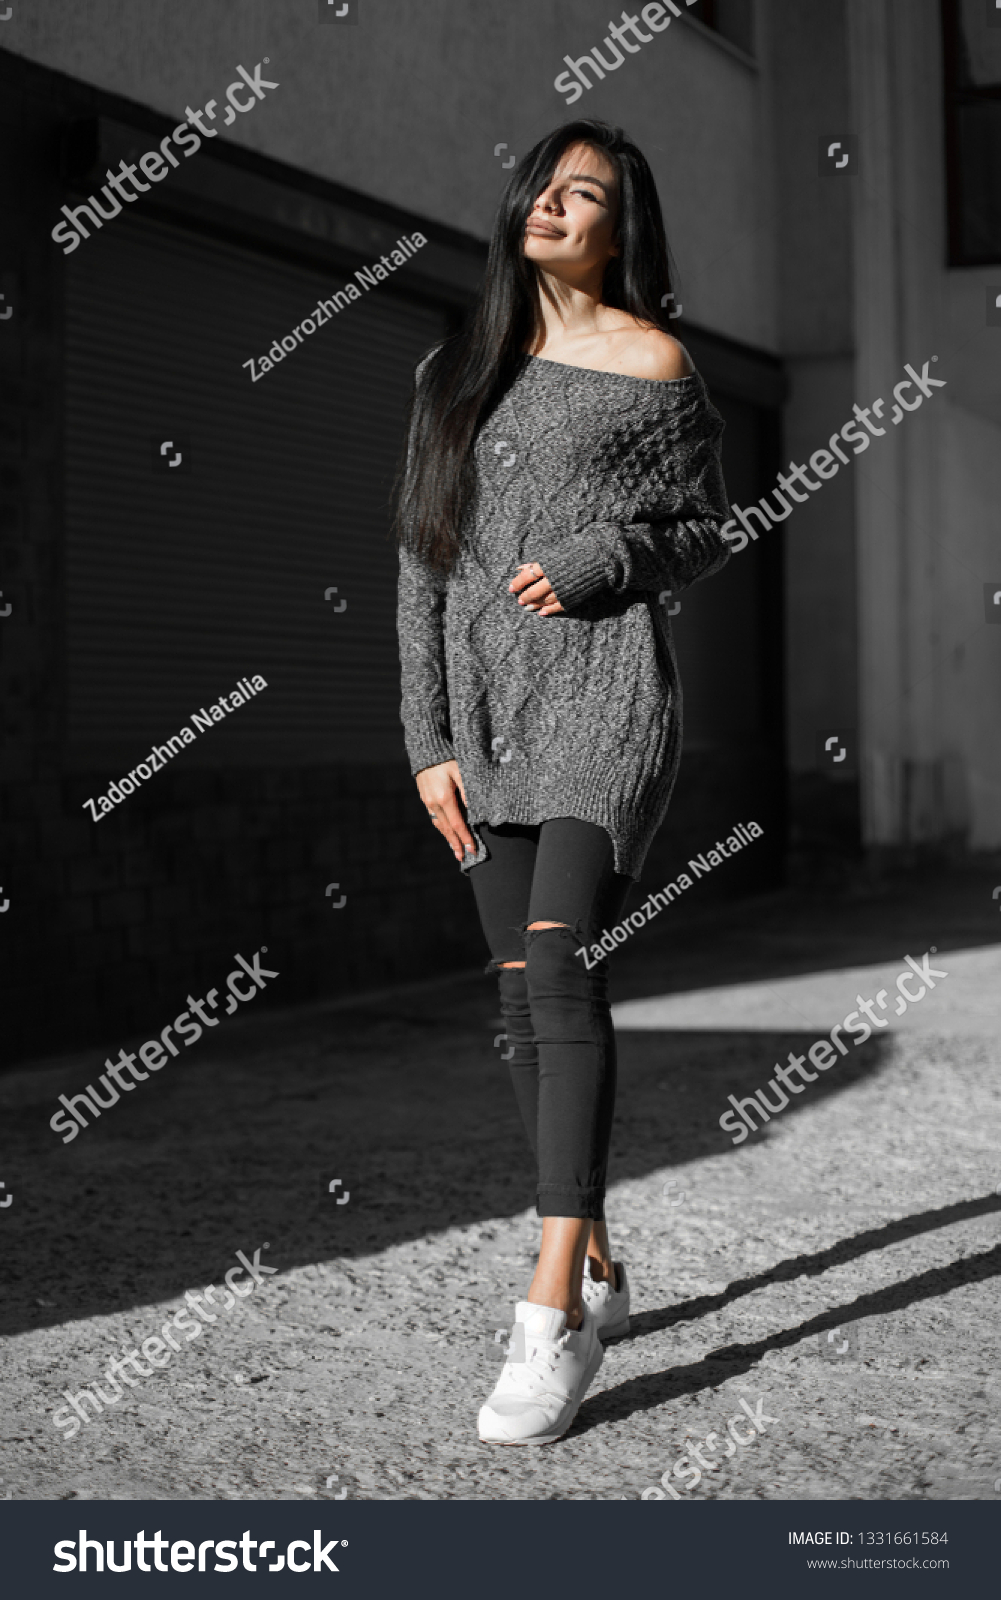 Beautiful model poses for the camera on the streets. #1331661584